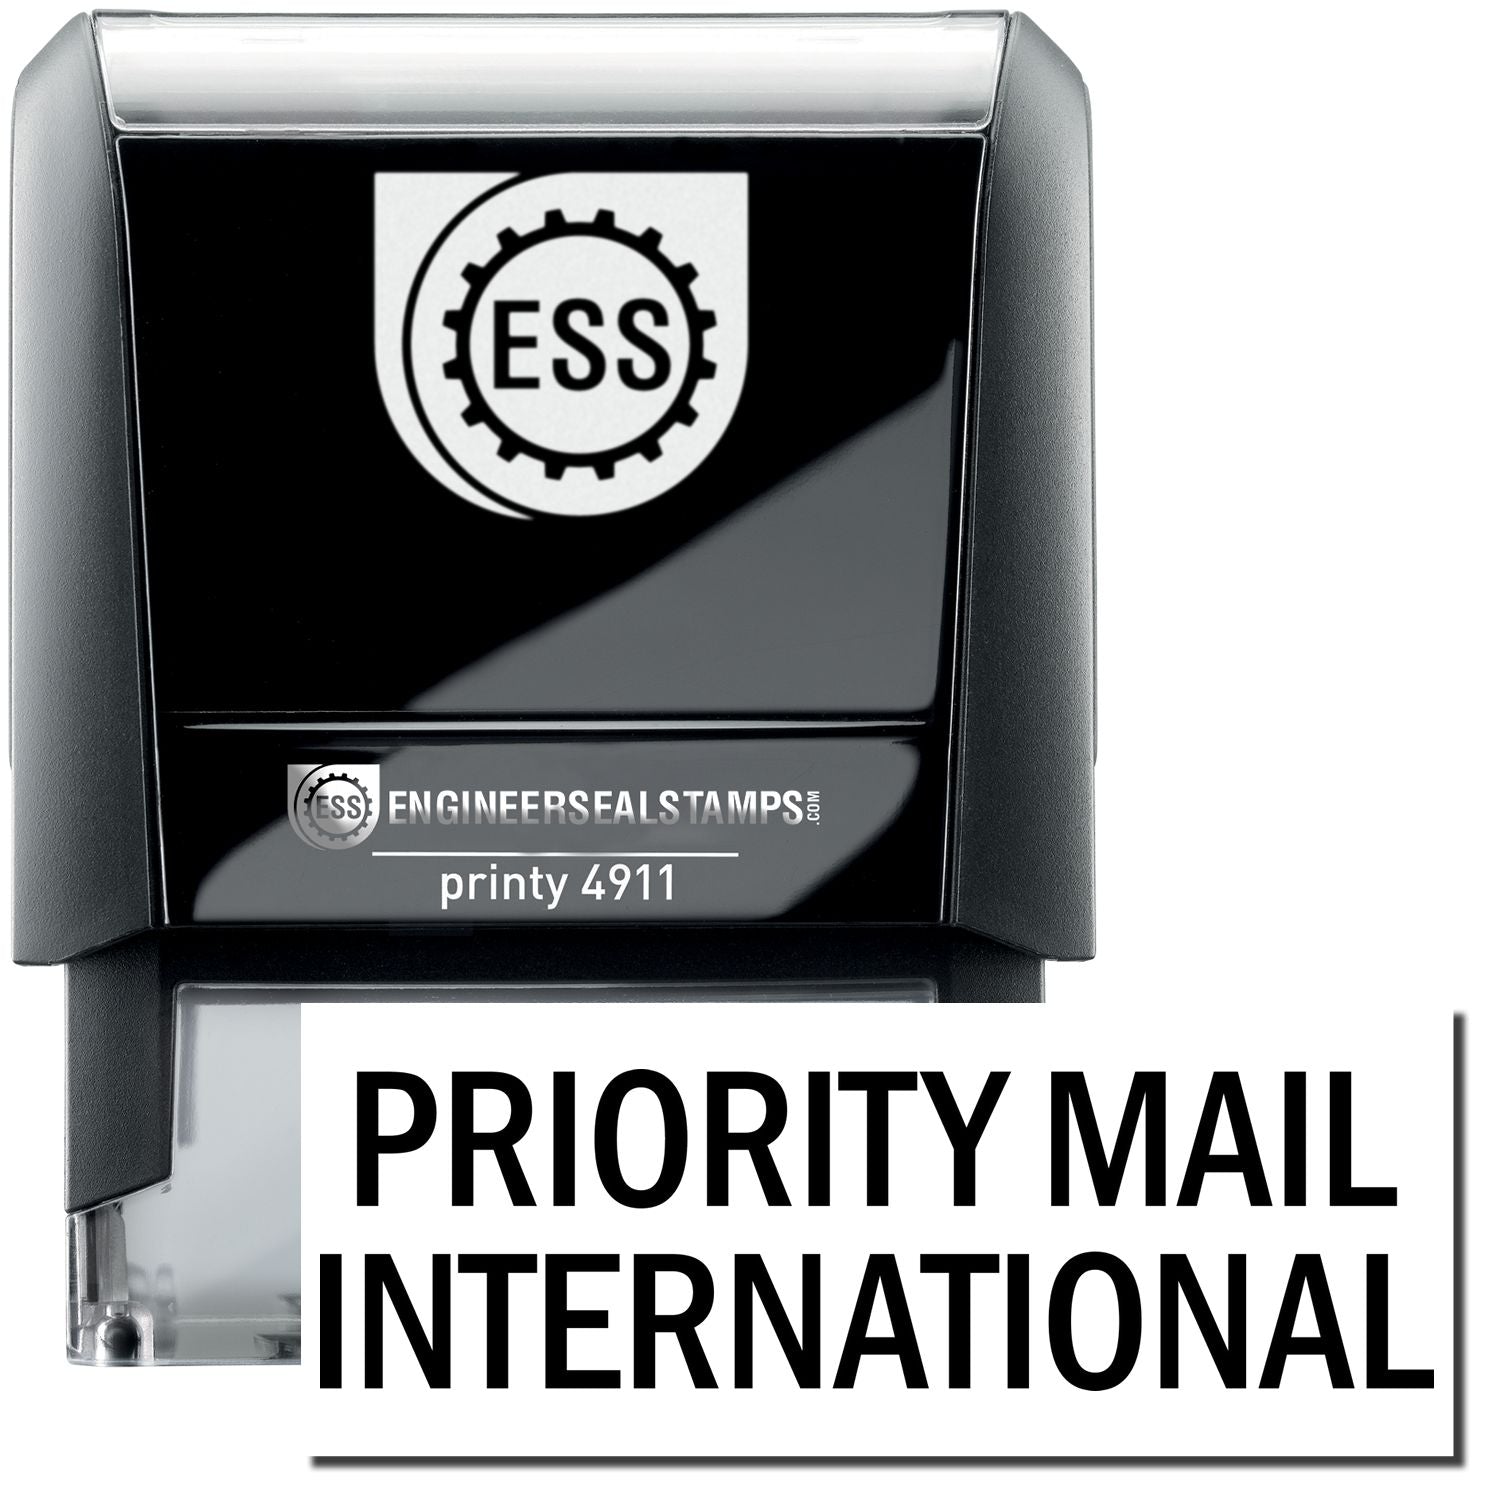 A self-inking stamp with a stamped image showing how the text "PRIORITY MAIL INTERNATIONAL" is displayed after stamping.